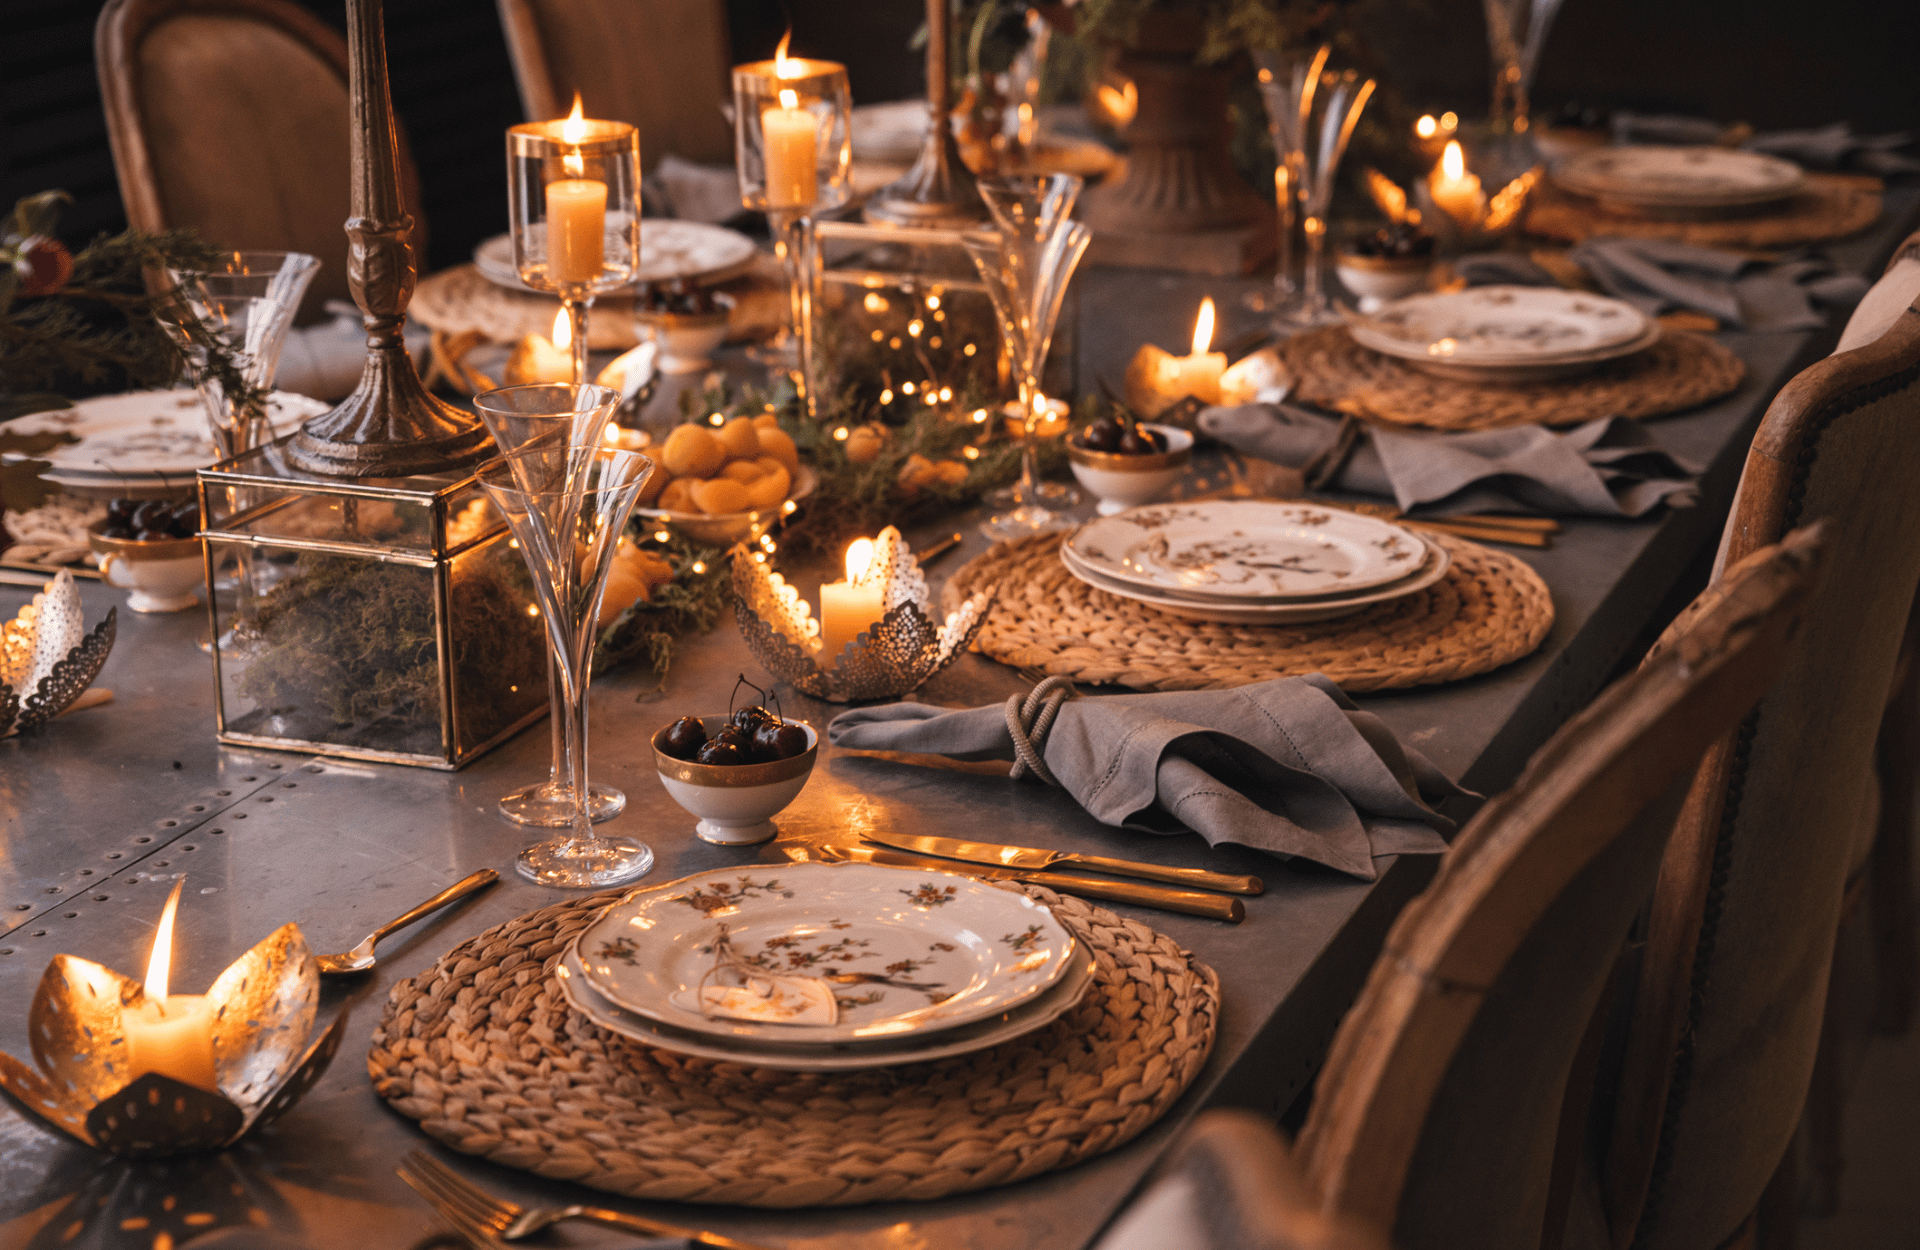 Warm christmas table scape with candles and oranges